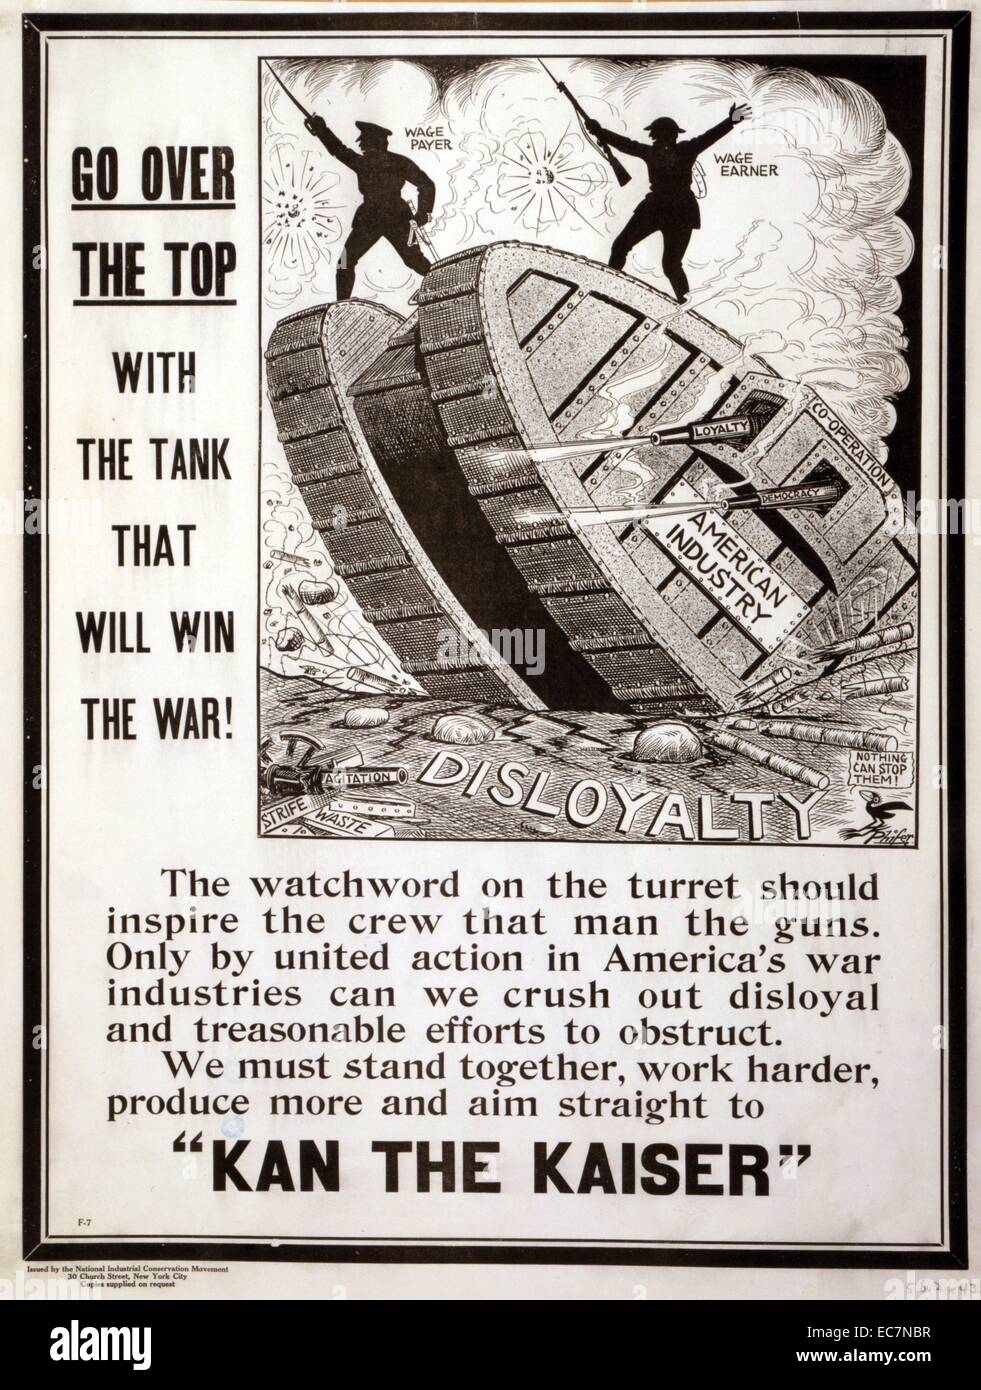 Go over the top with the tank that will win the war! Poster showing a tank 'American industry' rolling over 'Disloyalty'. Text says the watchword on the turret should inspire the crew that man the guns. Only by united action in America's war industries can we crush out disloyal and treasonable efforts to obstruct. We must stand together, work harder, produce more and aim straight to 'Kan the Kaiser.' Stock Photo